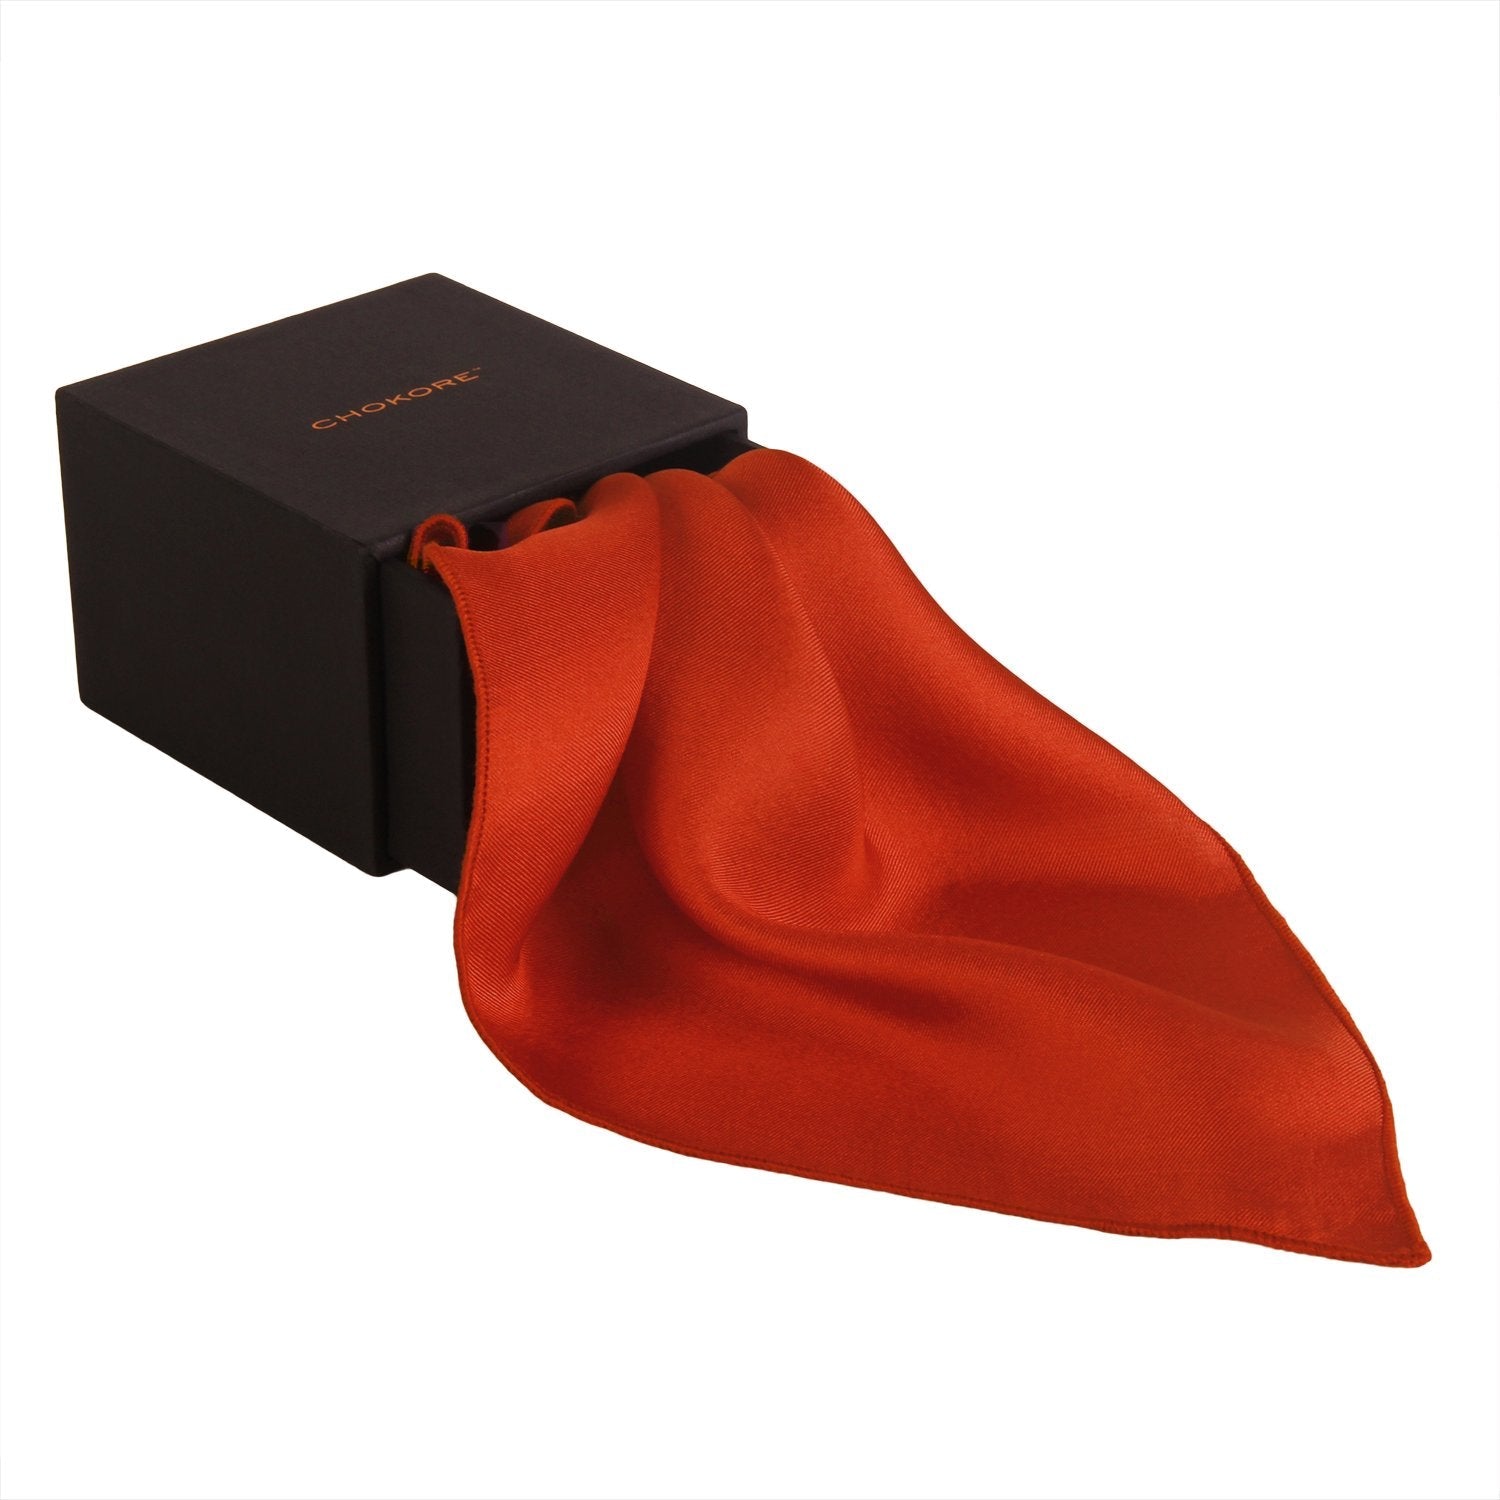 Chokore Terracotta Colour Pure Silk Pocket Square, from the Solids Line